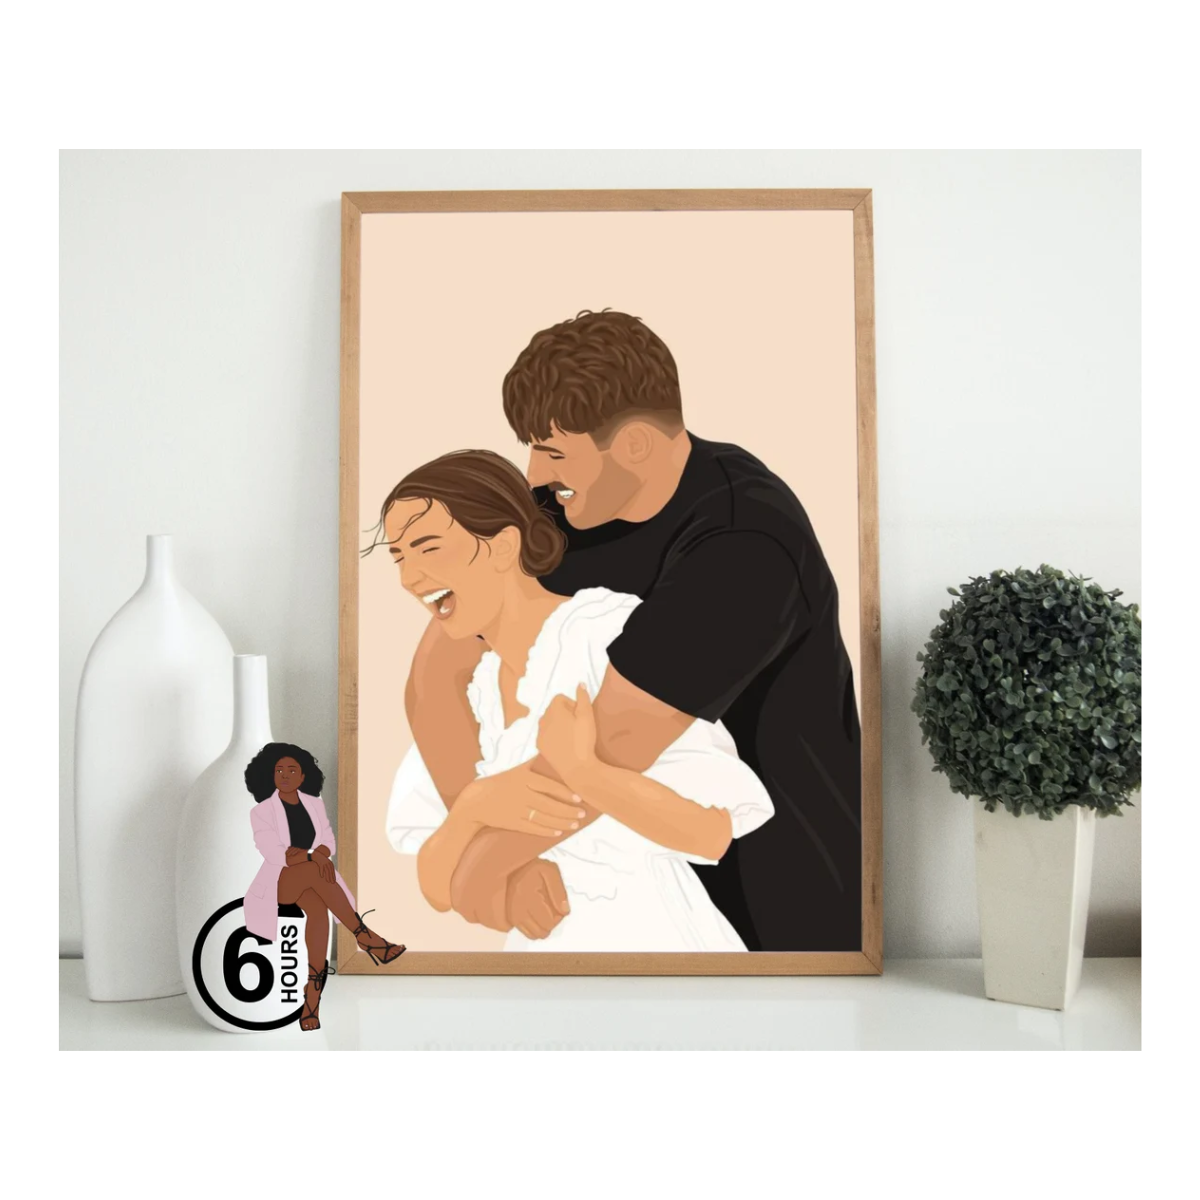 37. Capture Your Love Story Forever with a Hand-Painted Portrait - Perfect 7th Anniversary Gift